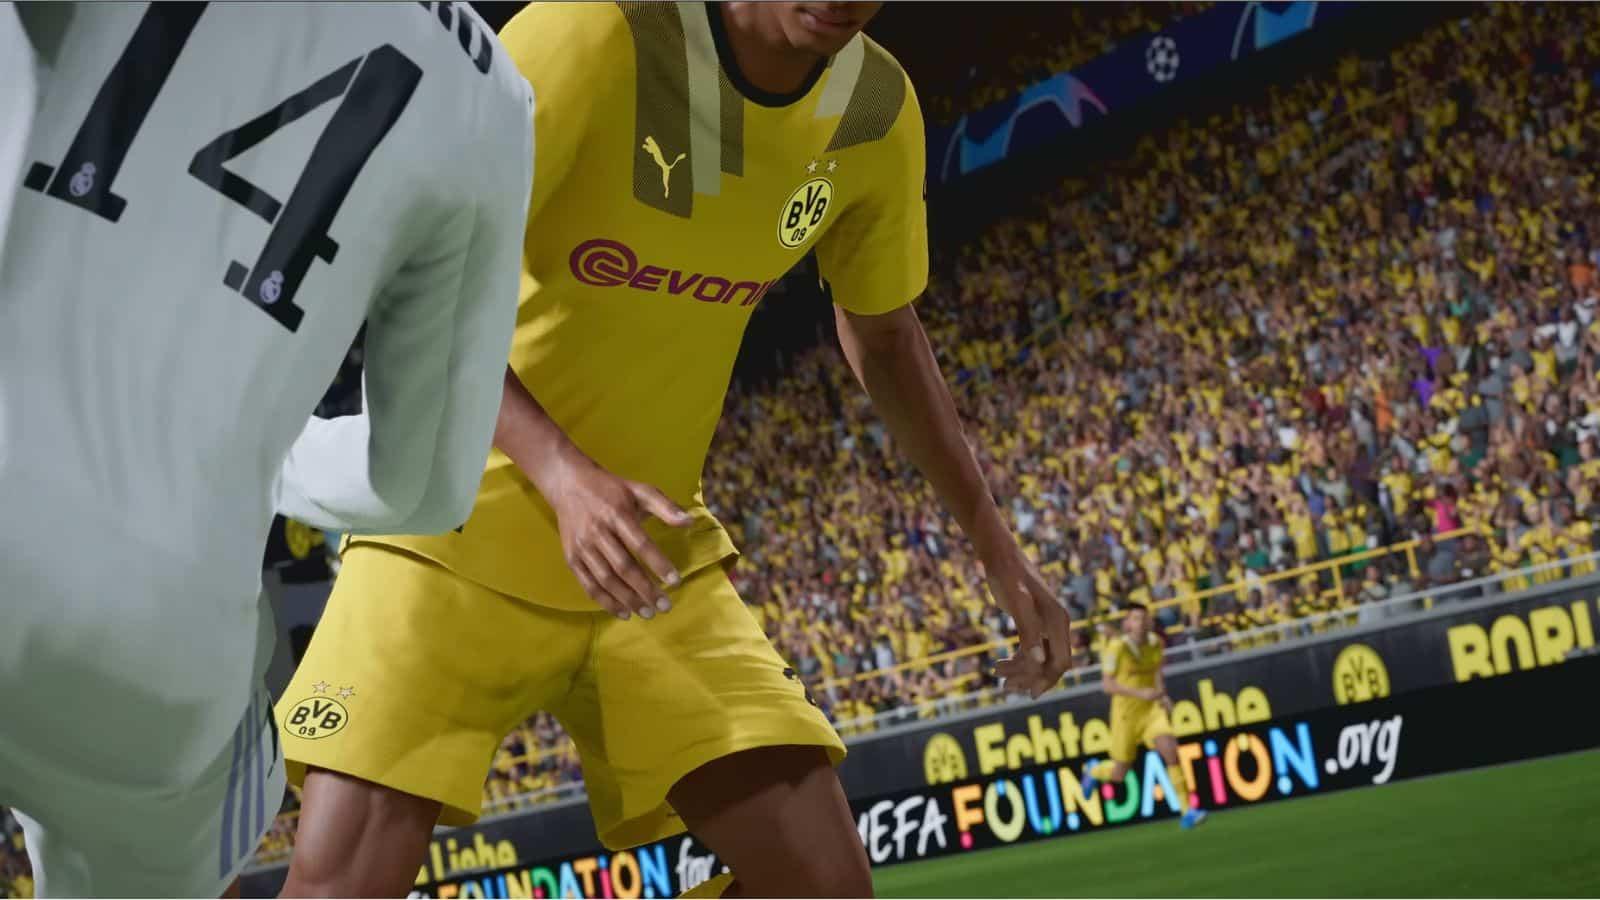 FIFA 23: Pro Clubs crossplay 'more complex' as 'multiple players